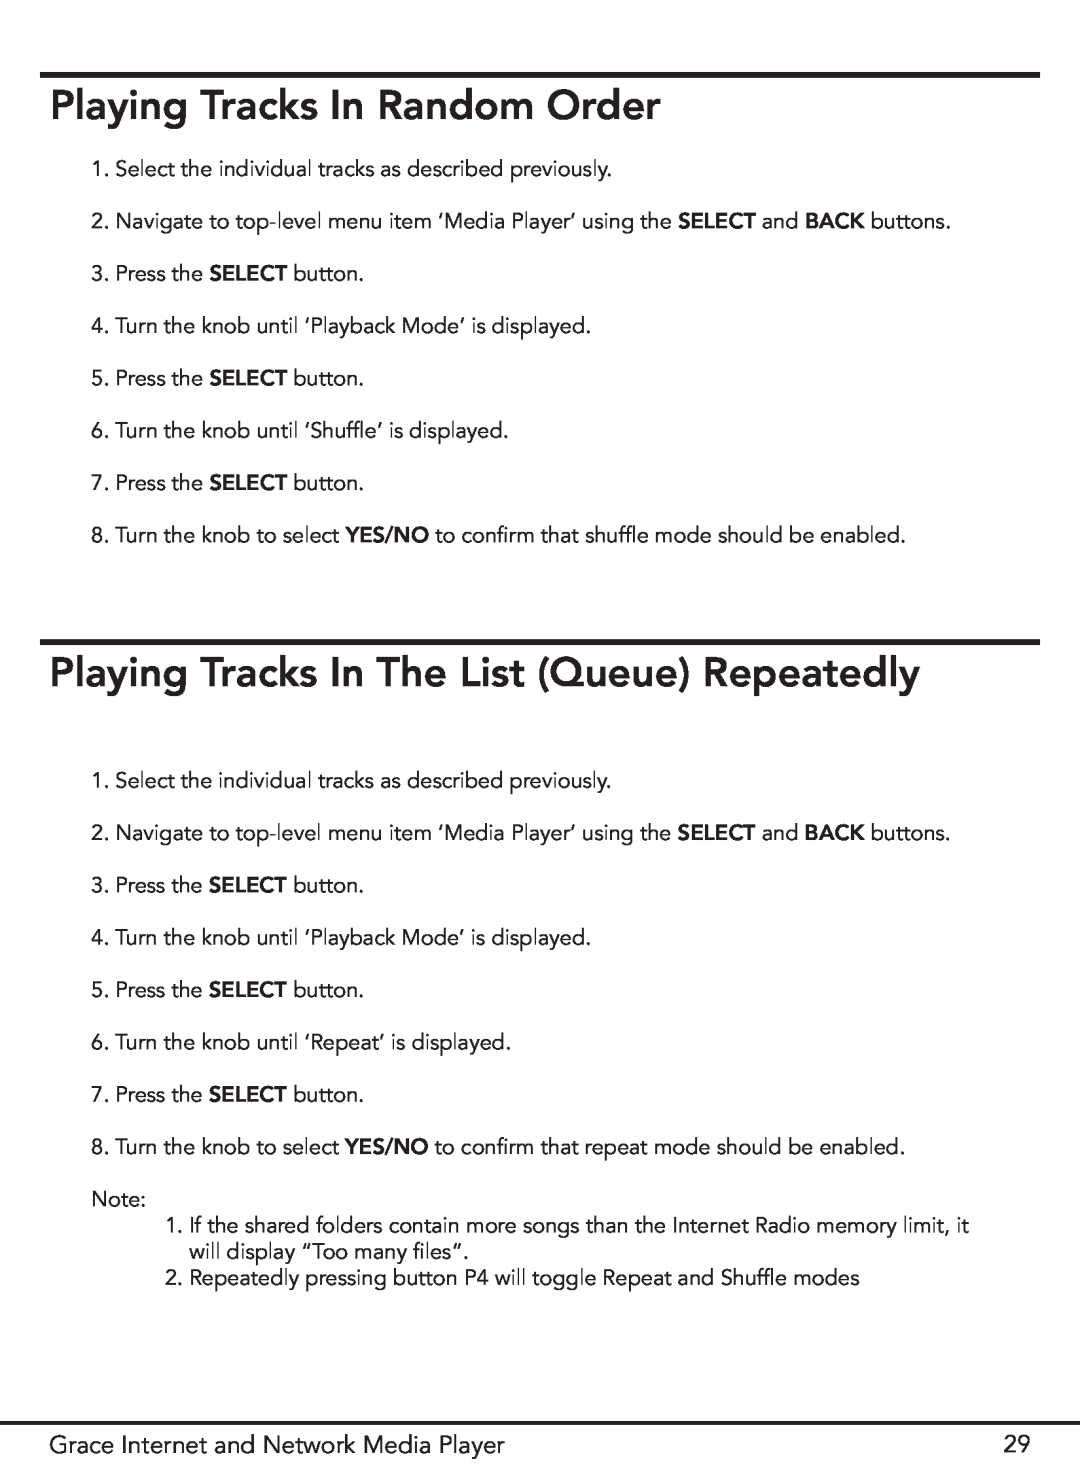 Grace GDI-IR3000 manual Playing Tracks In Random Order, Playing Tracks In The List Queue Repeatedly 